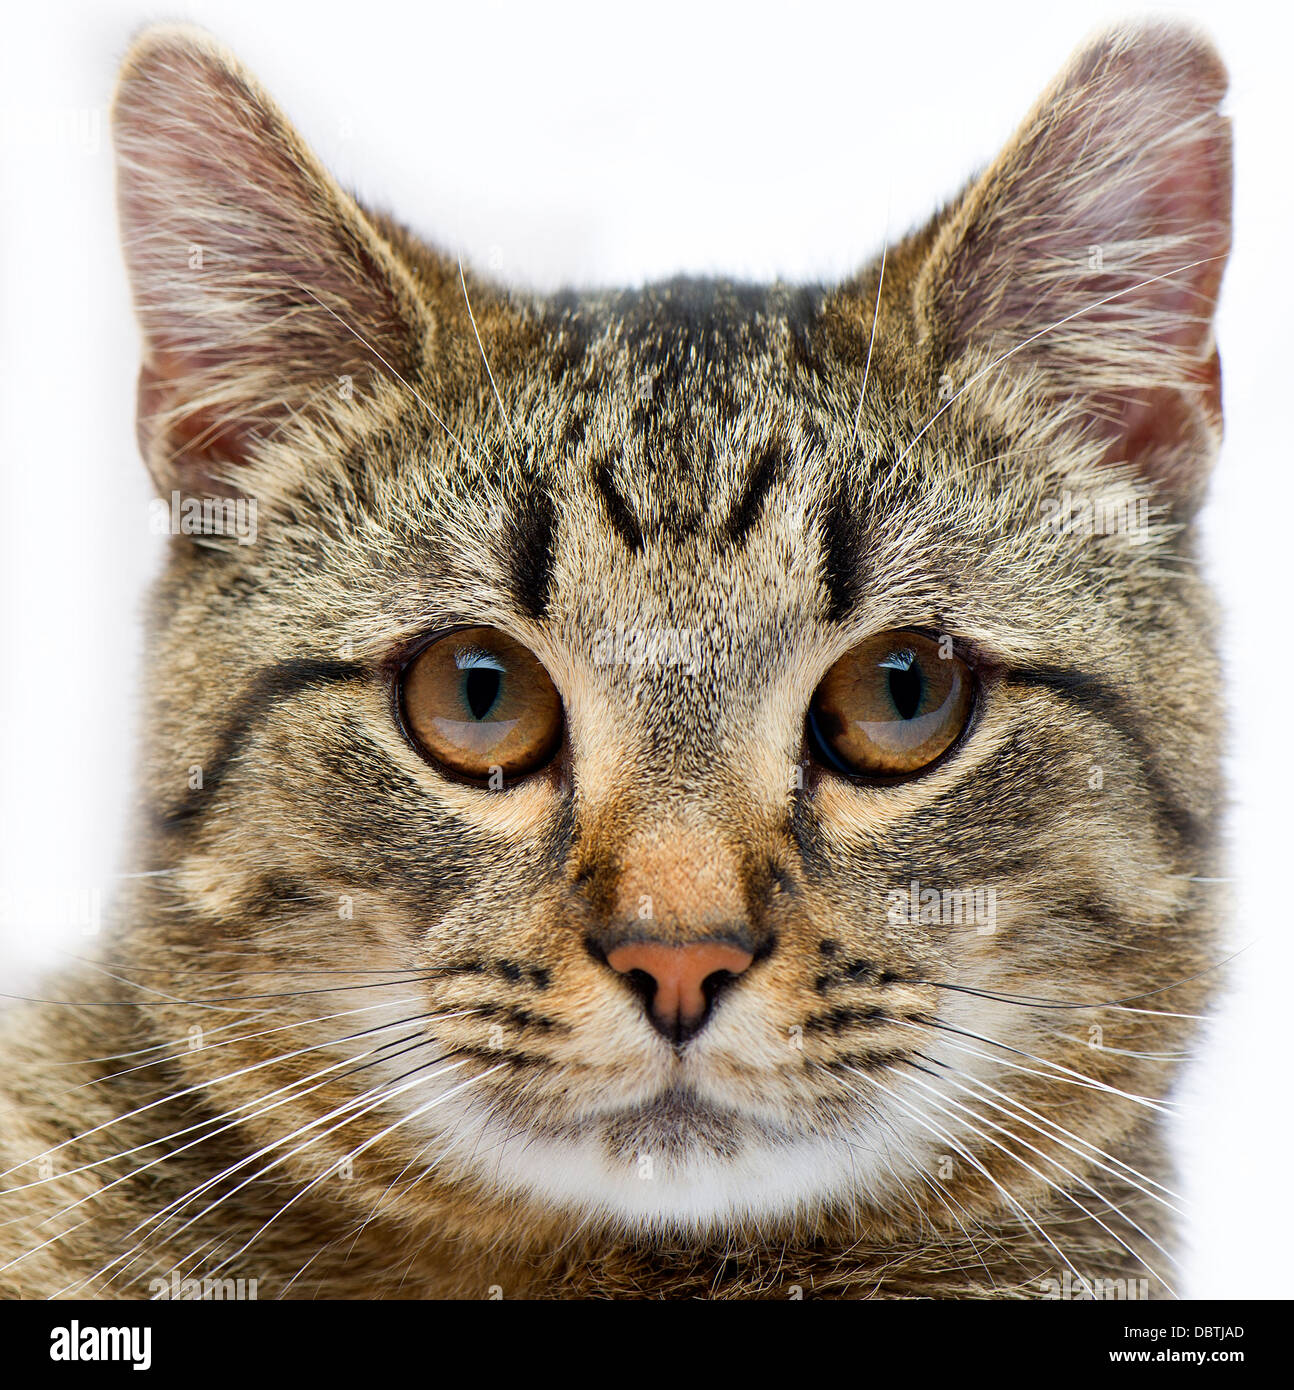 A closeup picture of a cat's face on a white background. Stock Photo